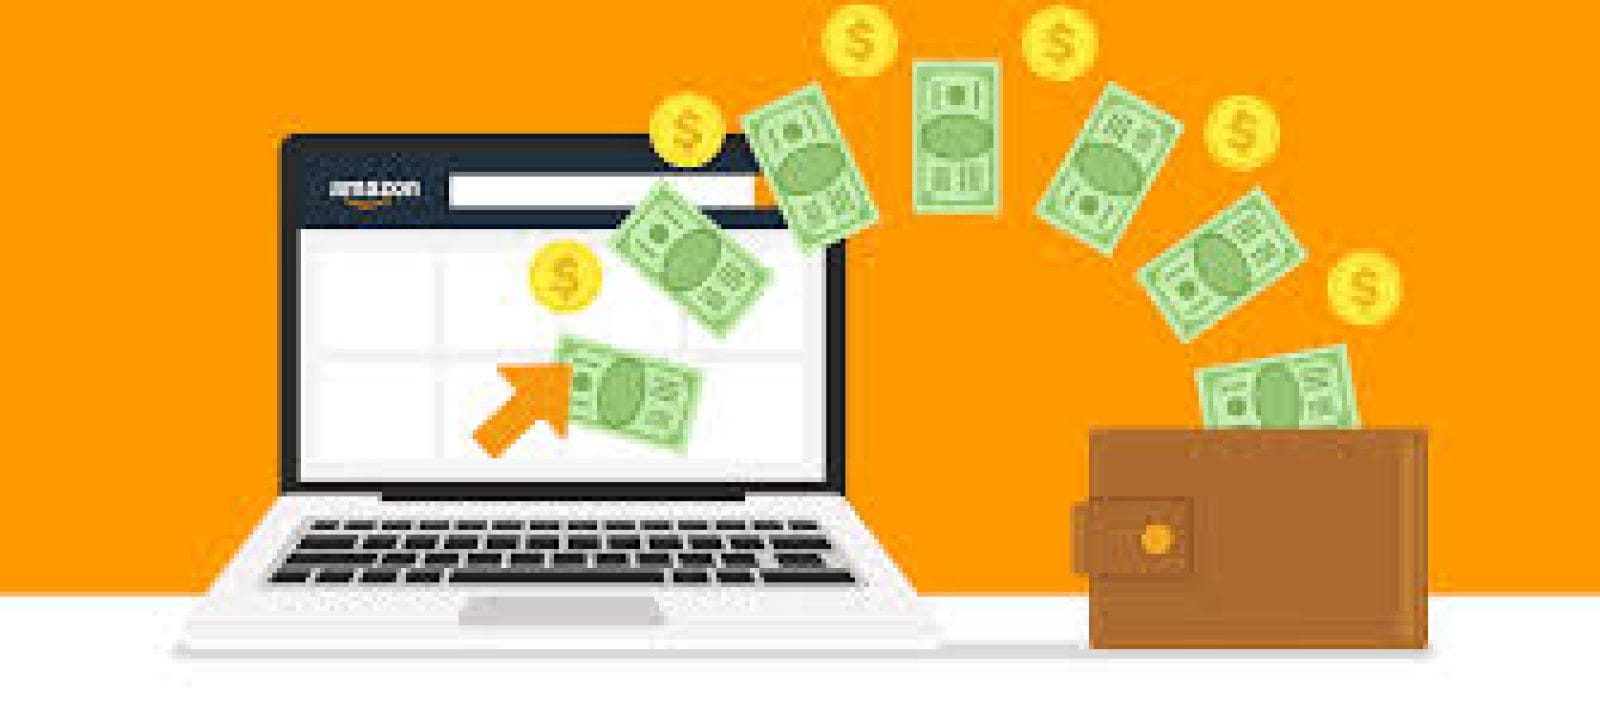 Amazon PPC Agency – How to Choose the Right PPC Agency for Your Business Needs and Budget